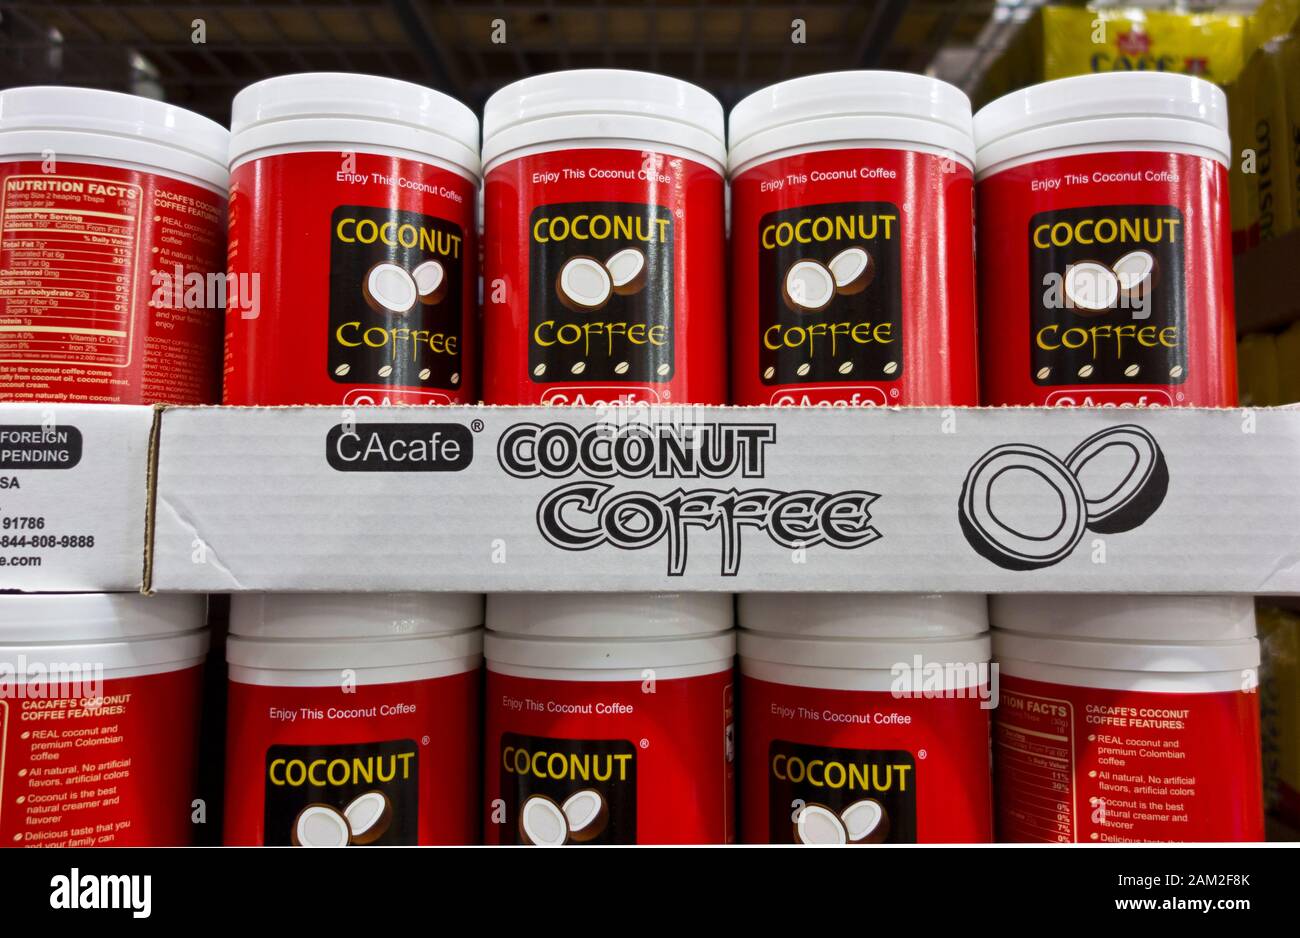 Containers of Coconut Coffee for sale in a retail store in the United States. Stock Photo